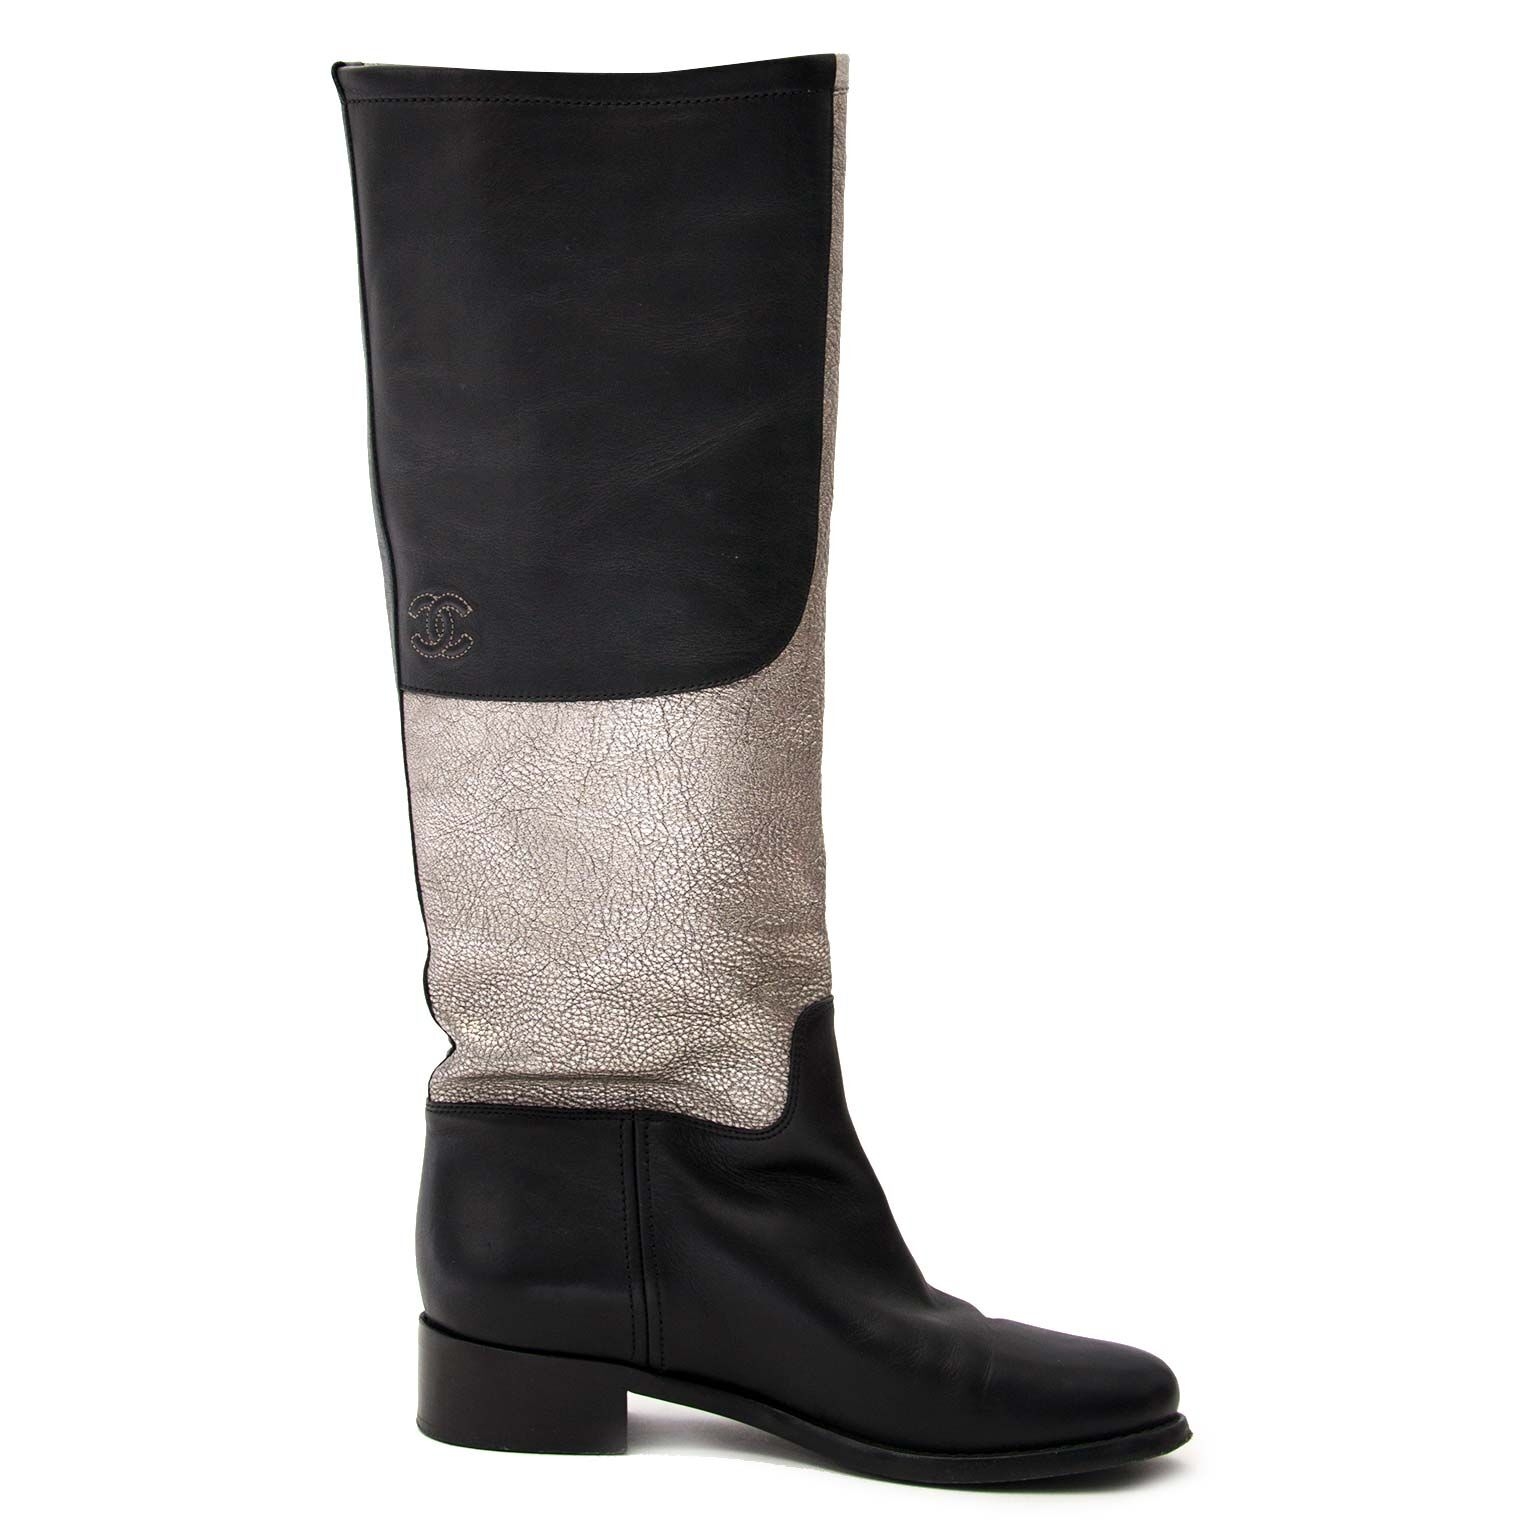 Riding boots Chanel Black size 42 EU in Water snake - 30482590